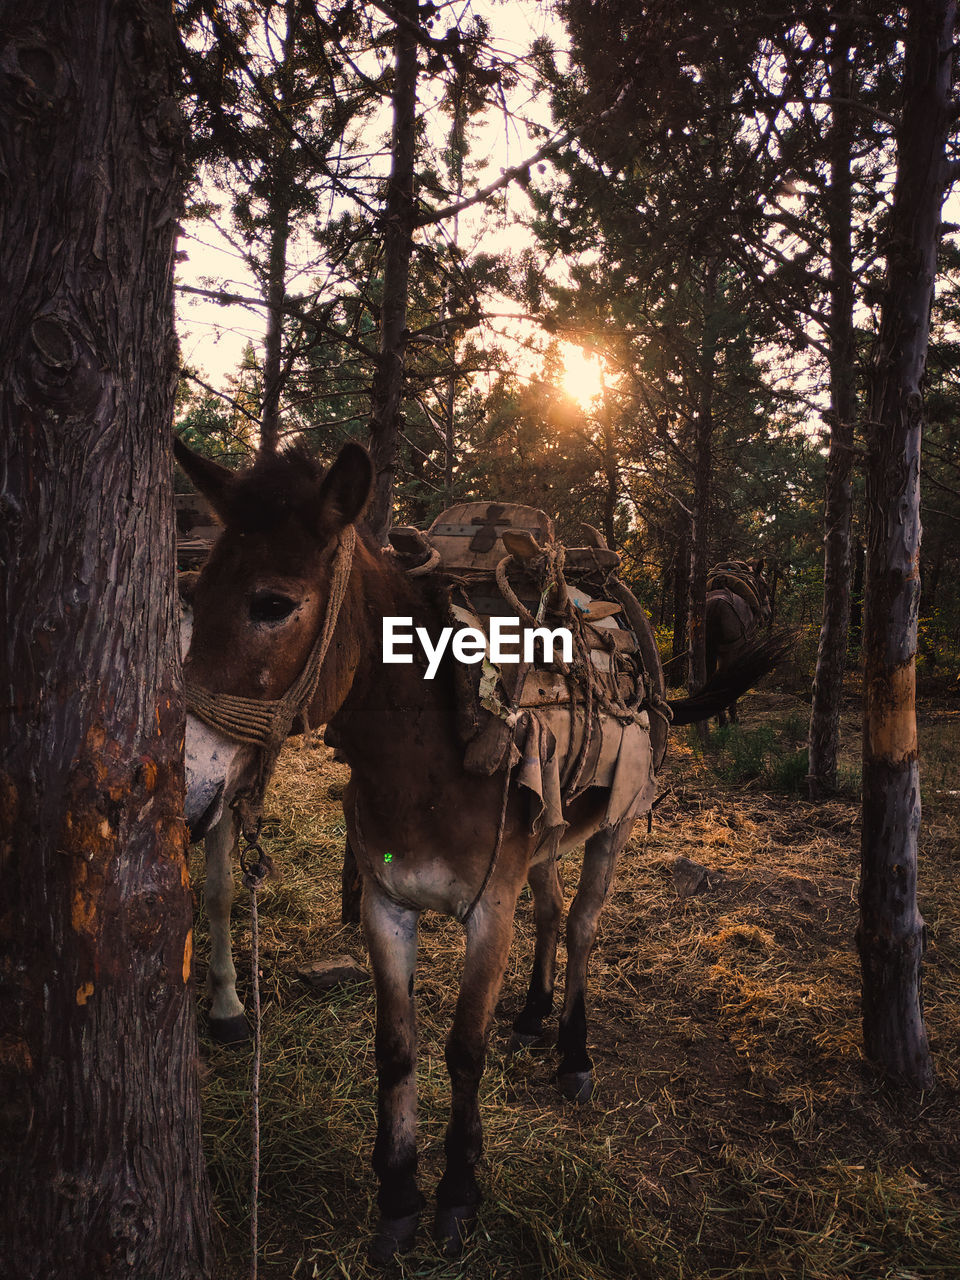 VIEW OF HORSE IN FOREST